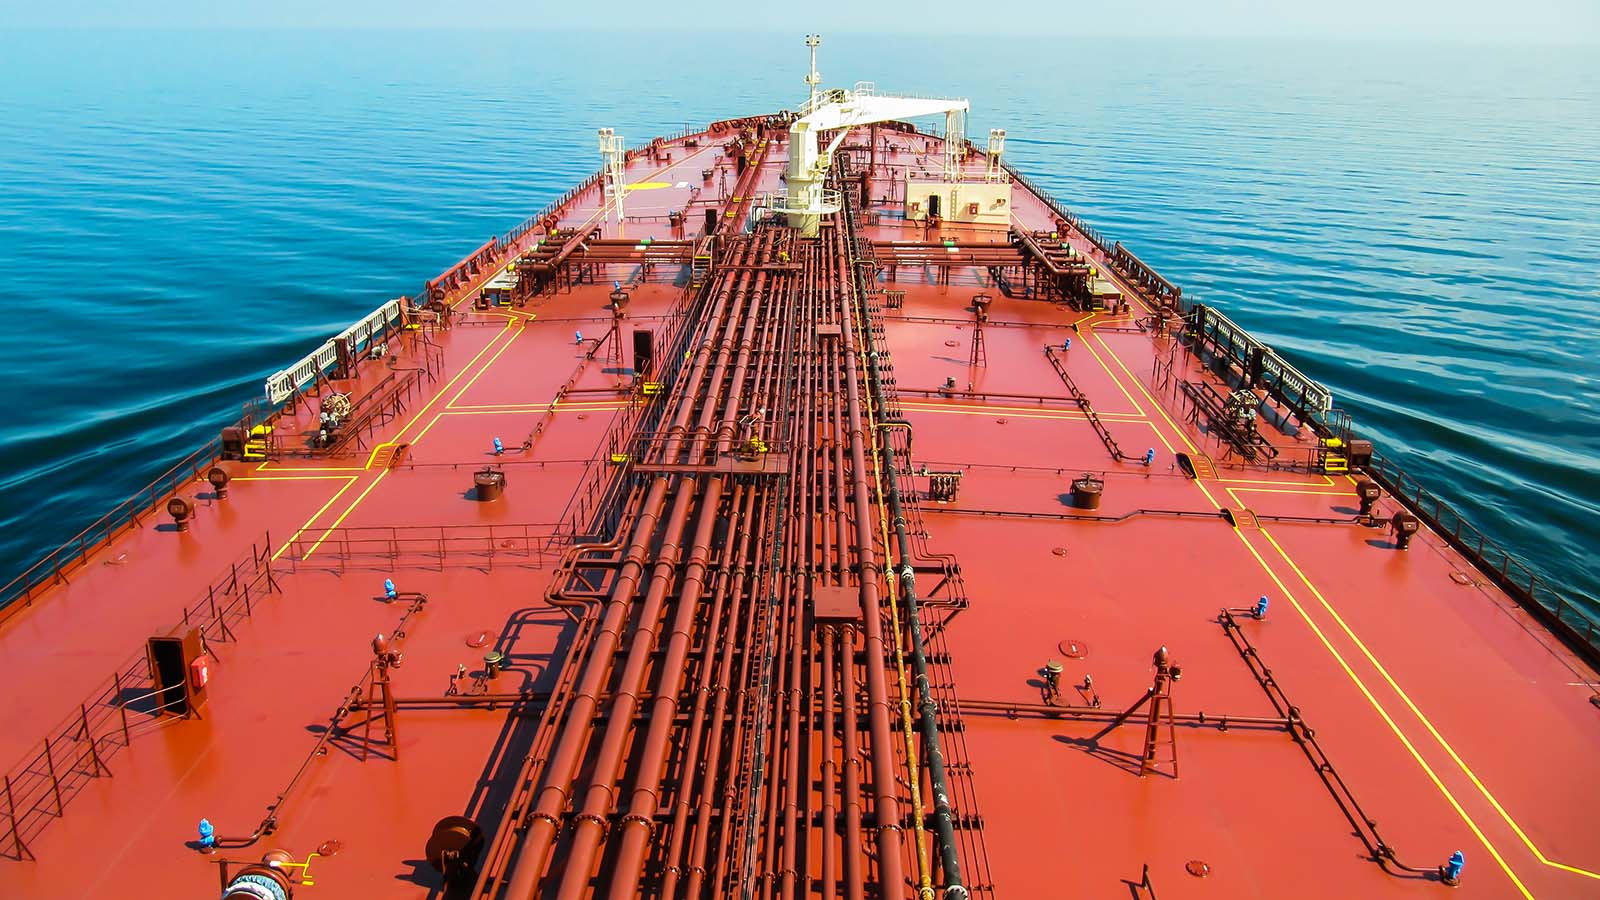 A photo of a large oil ship on water representing RIG stock.